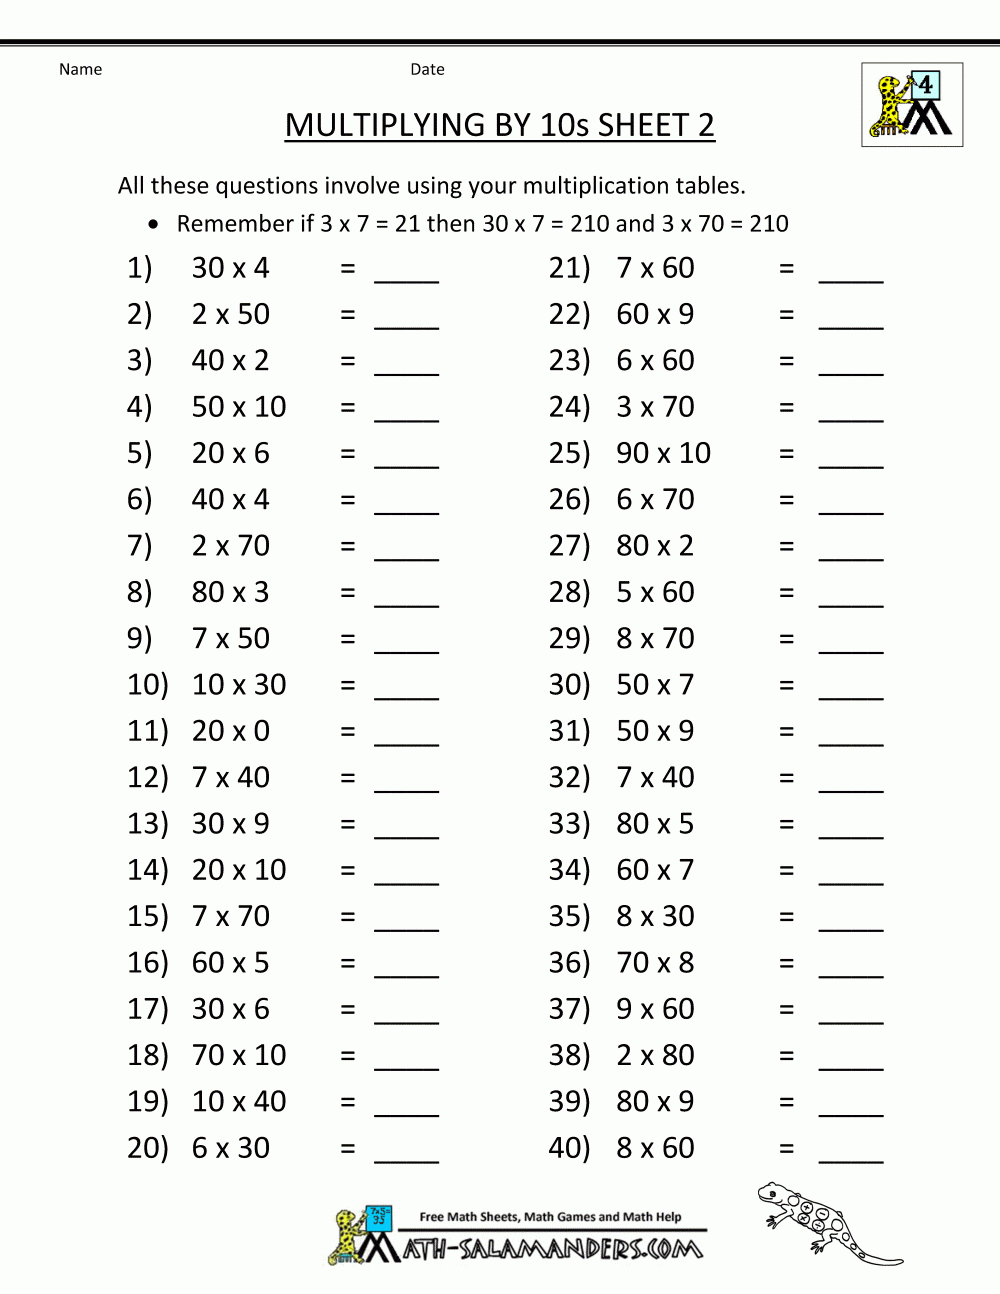 multiplication-and-division-facts-worksheets-multiplication-worksheets